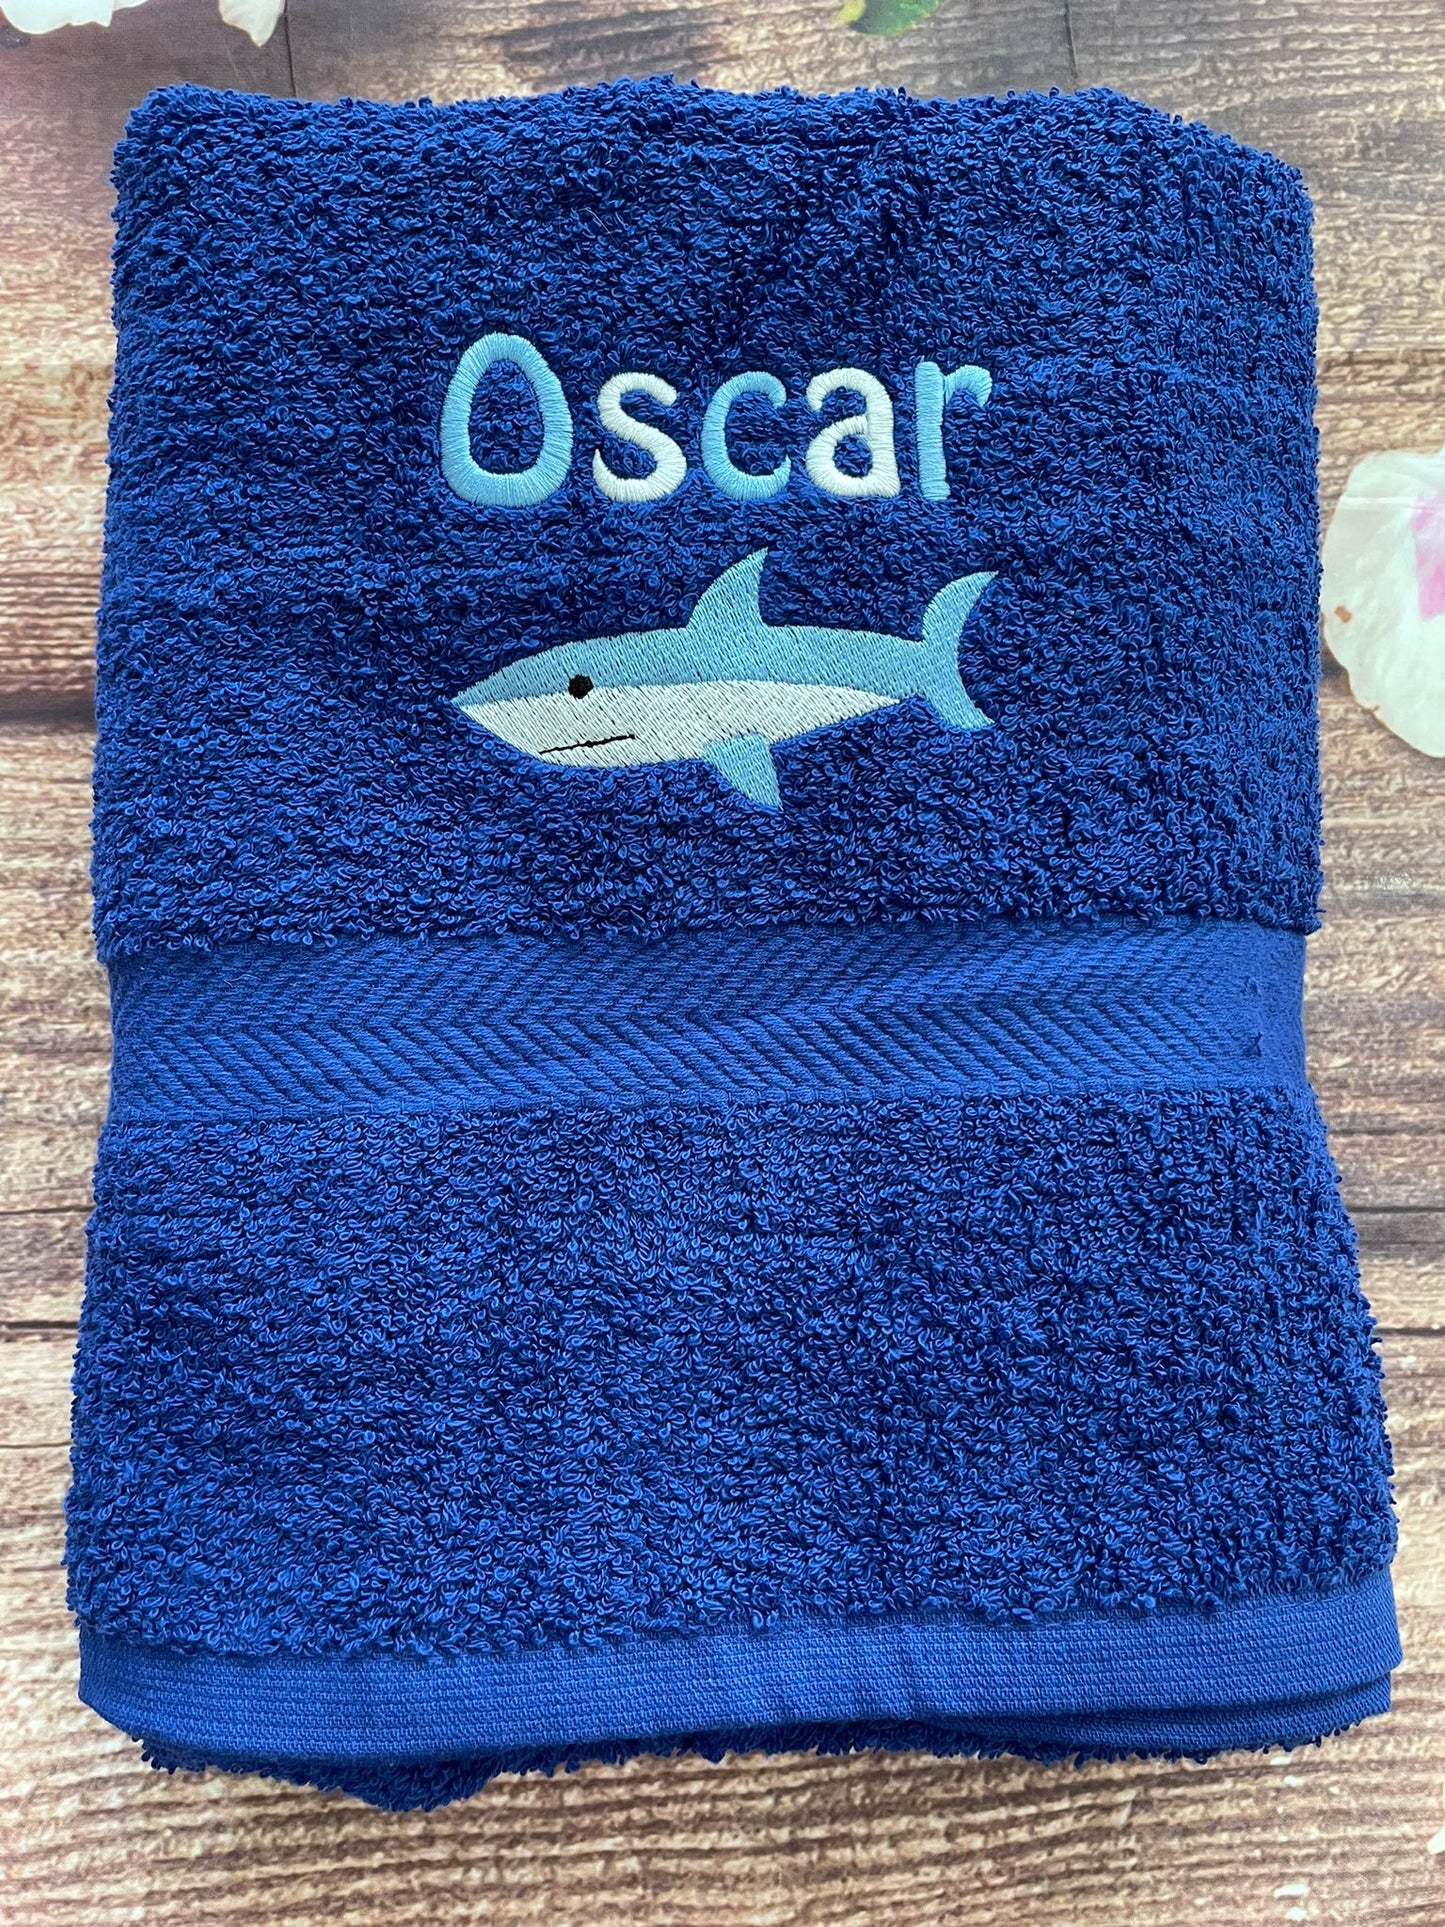 Personalised embroidered swimming or sports towel. Ideal gift // shark